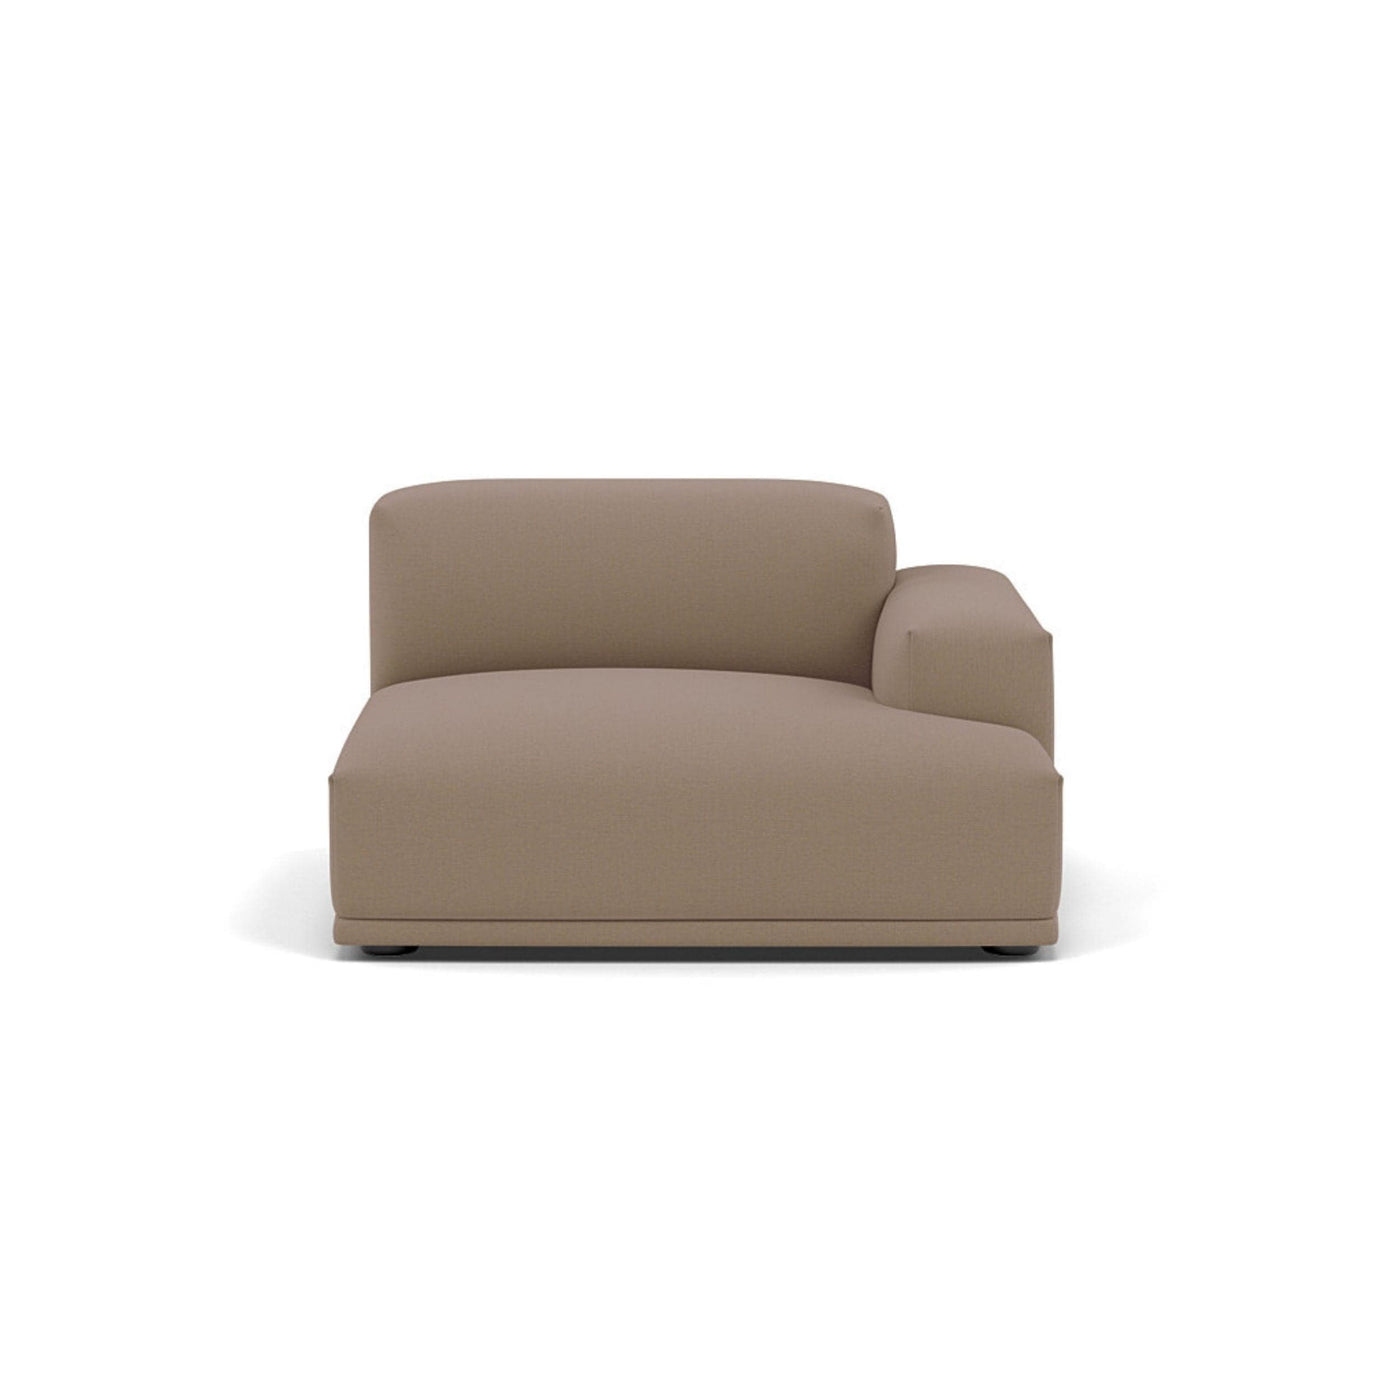 Muuto Connect Modular Sofa System, module b, right armrest. Available from someday designs. #colour_steelcut-trio-426